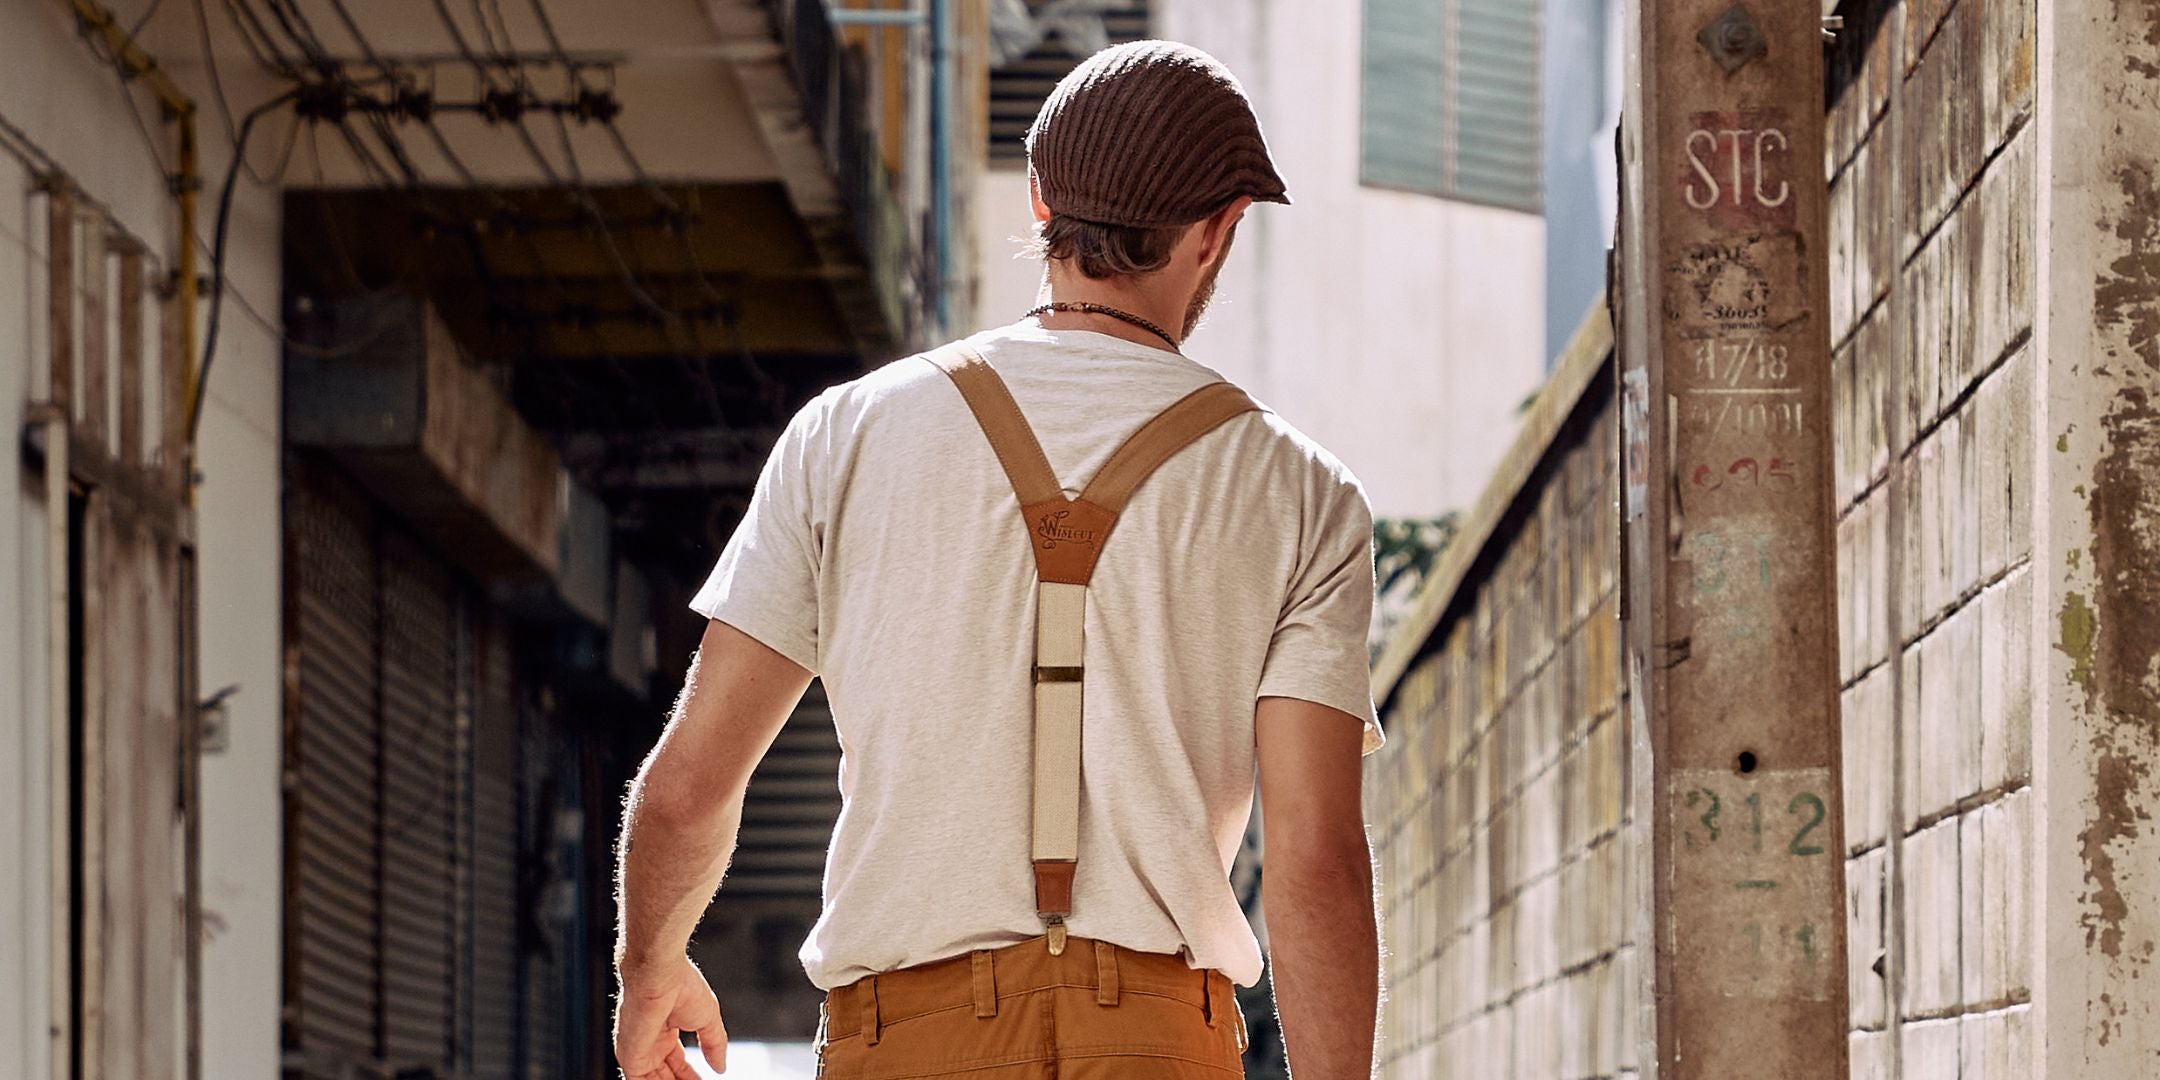 Man walking in street wearing white shirt duo tone colored suspenders and mustard colored pants he is wearing a flat cap